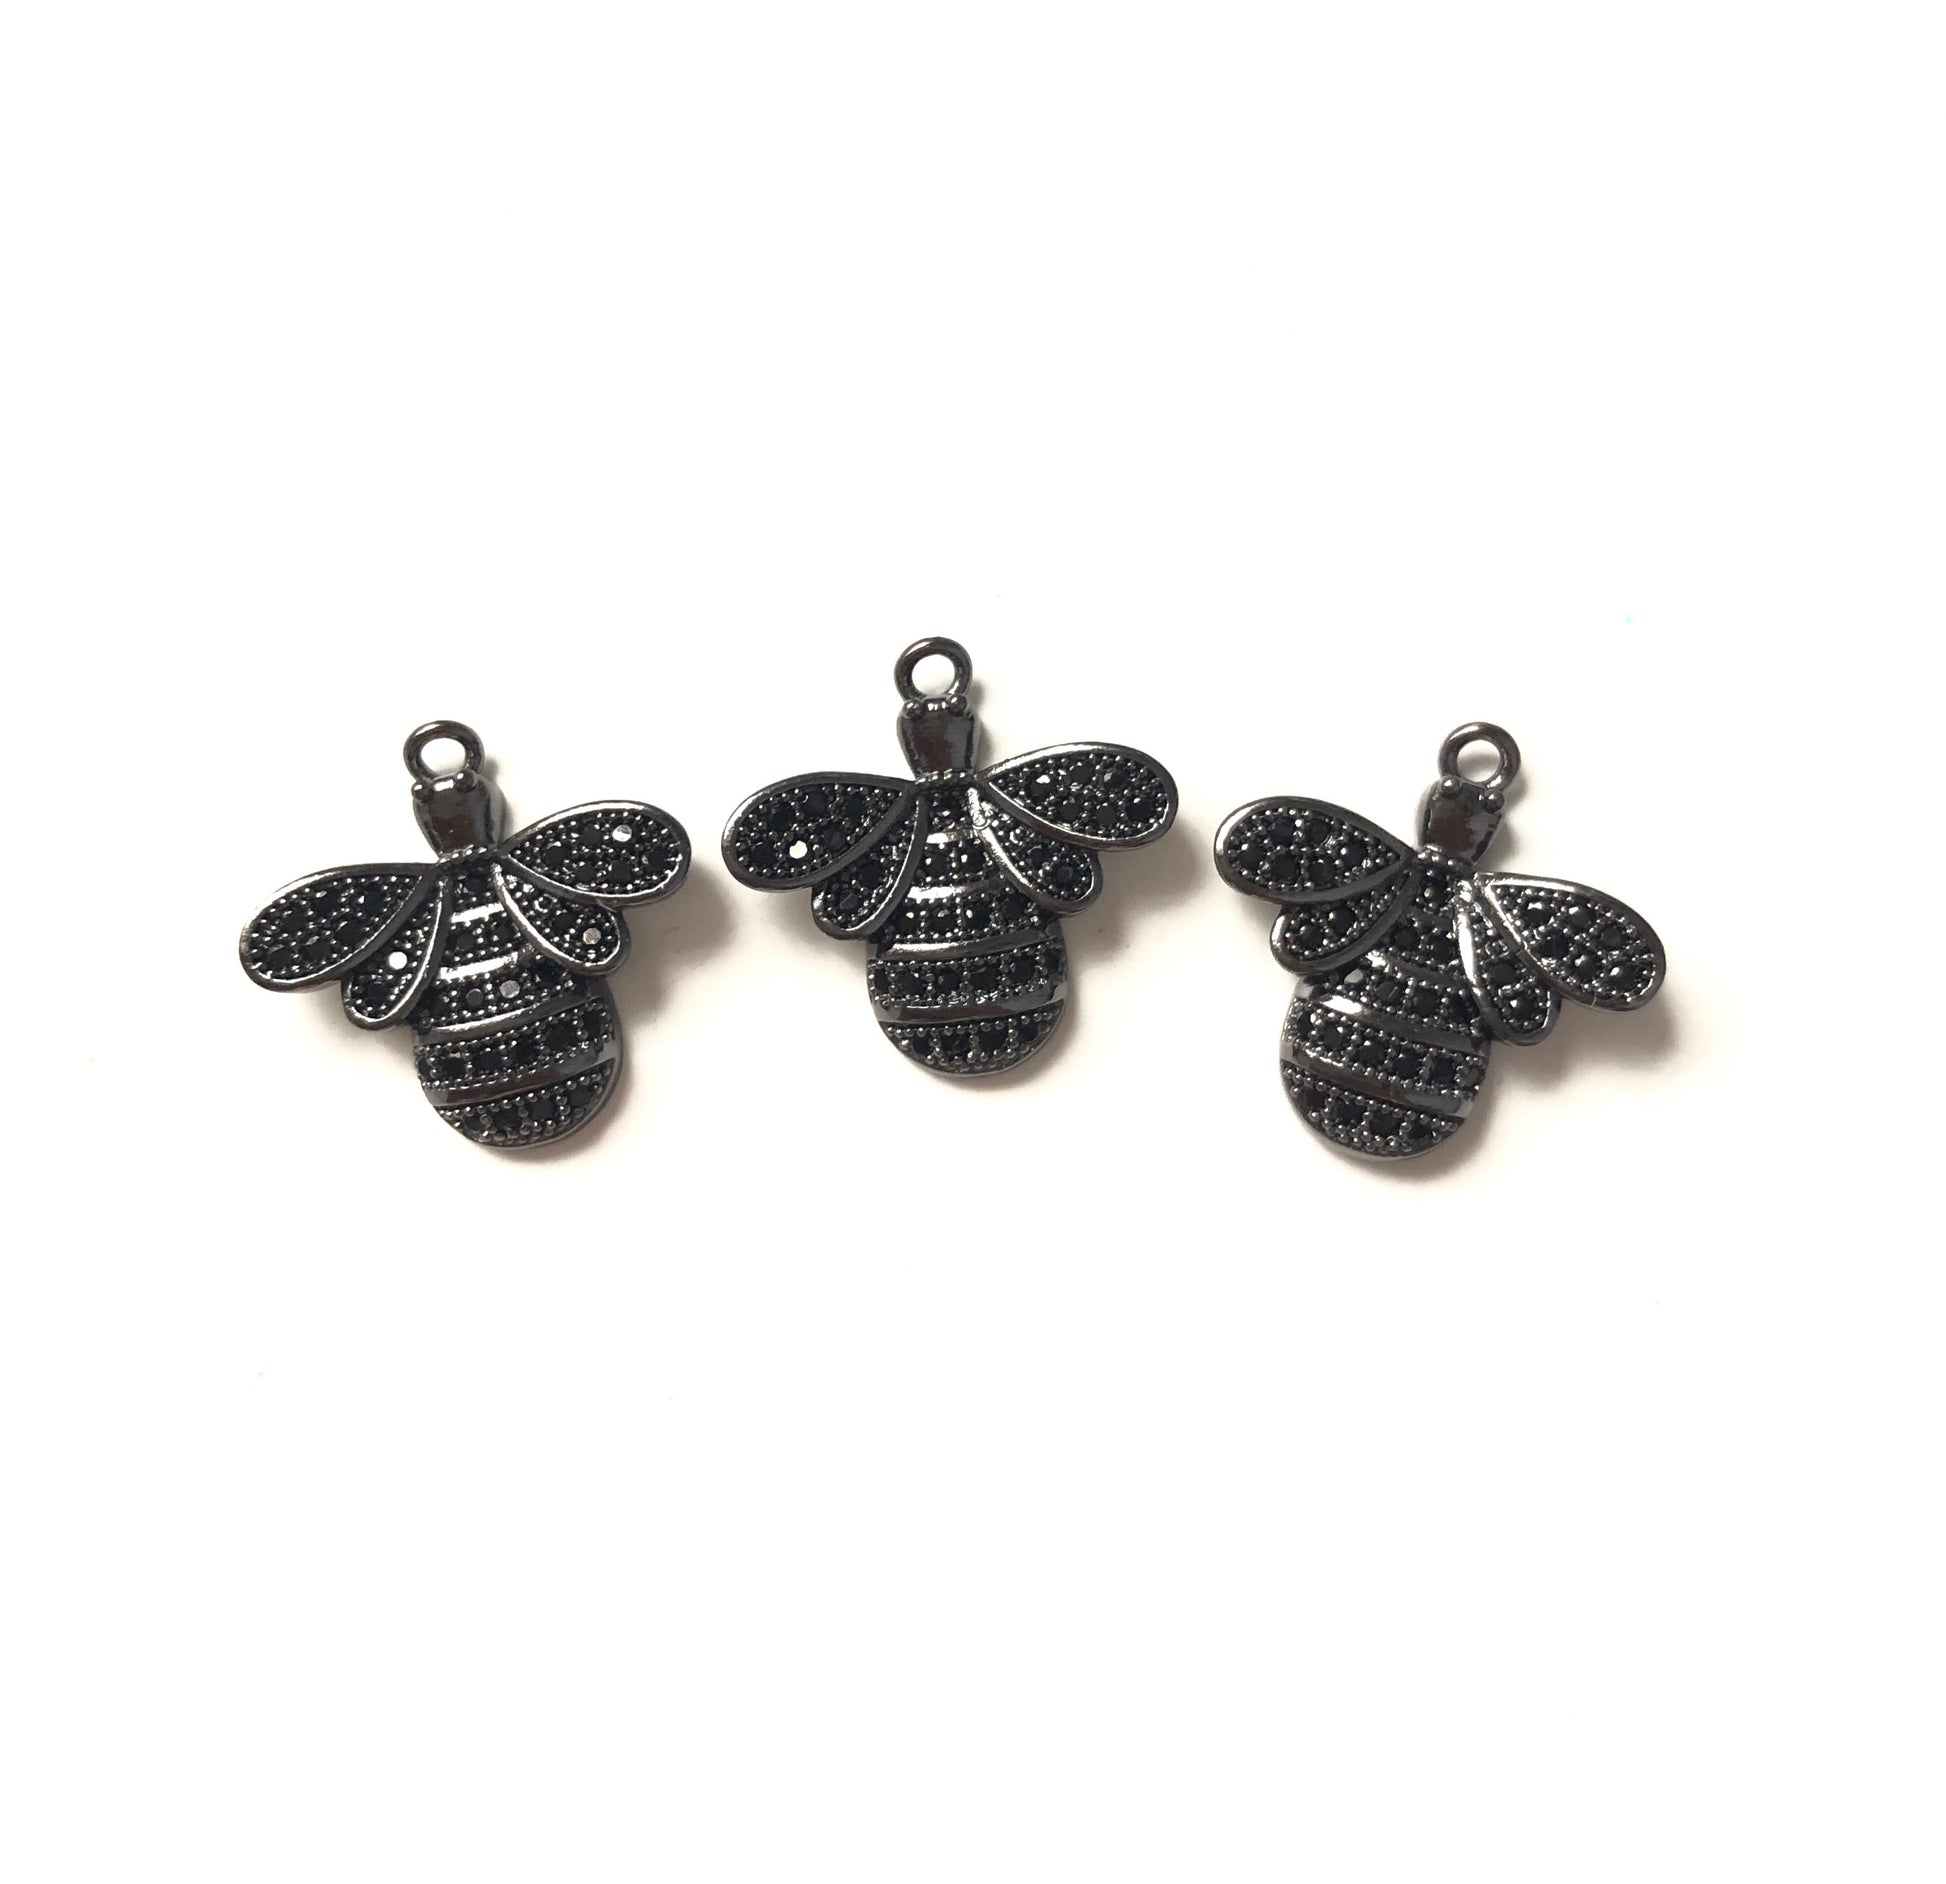 10pcs/lot 17*17mm CZ Paved Small Bee Charms Black on Black CZ Paved Charms Animals & Insects Charms Beads Beyond